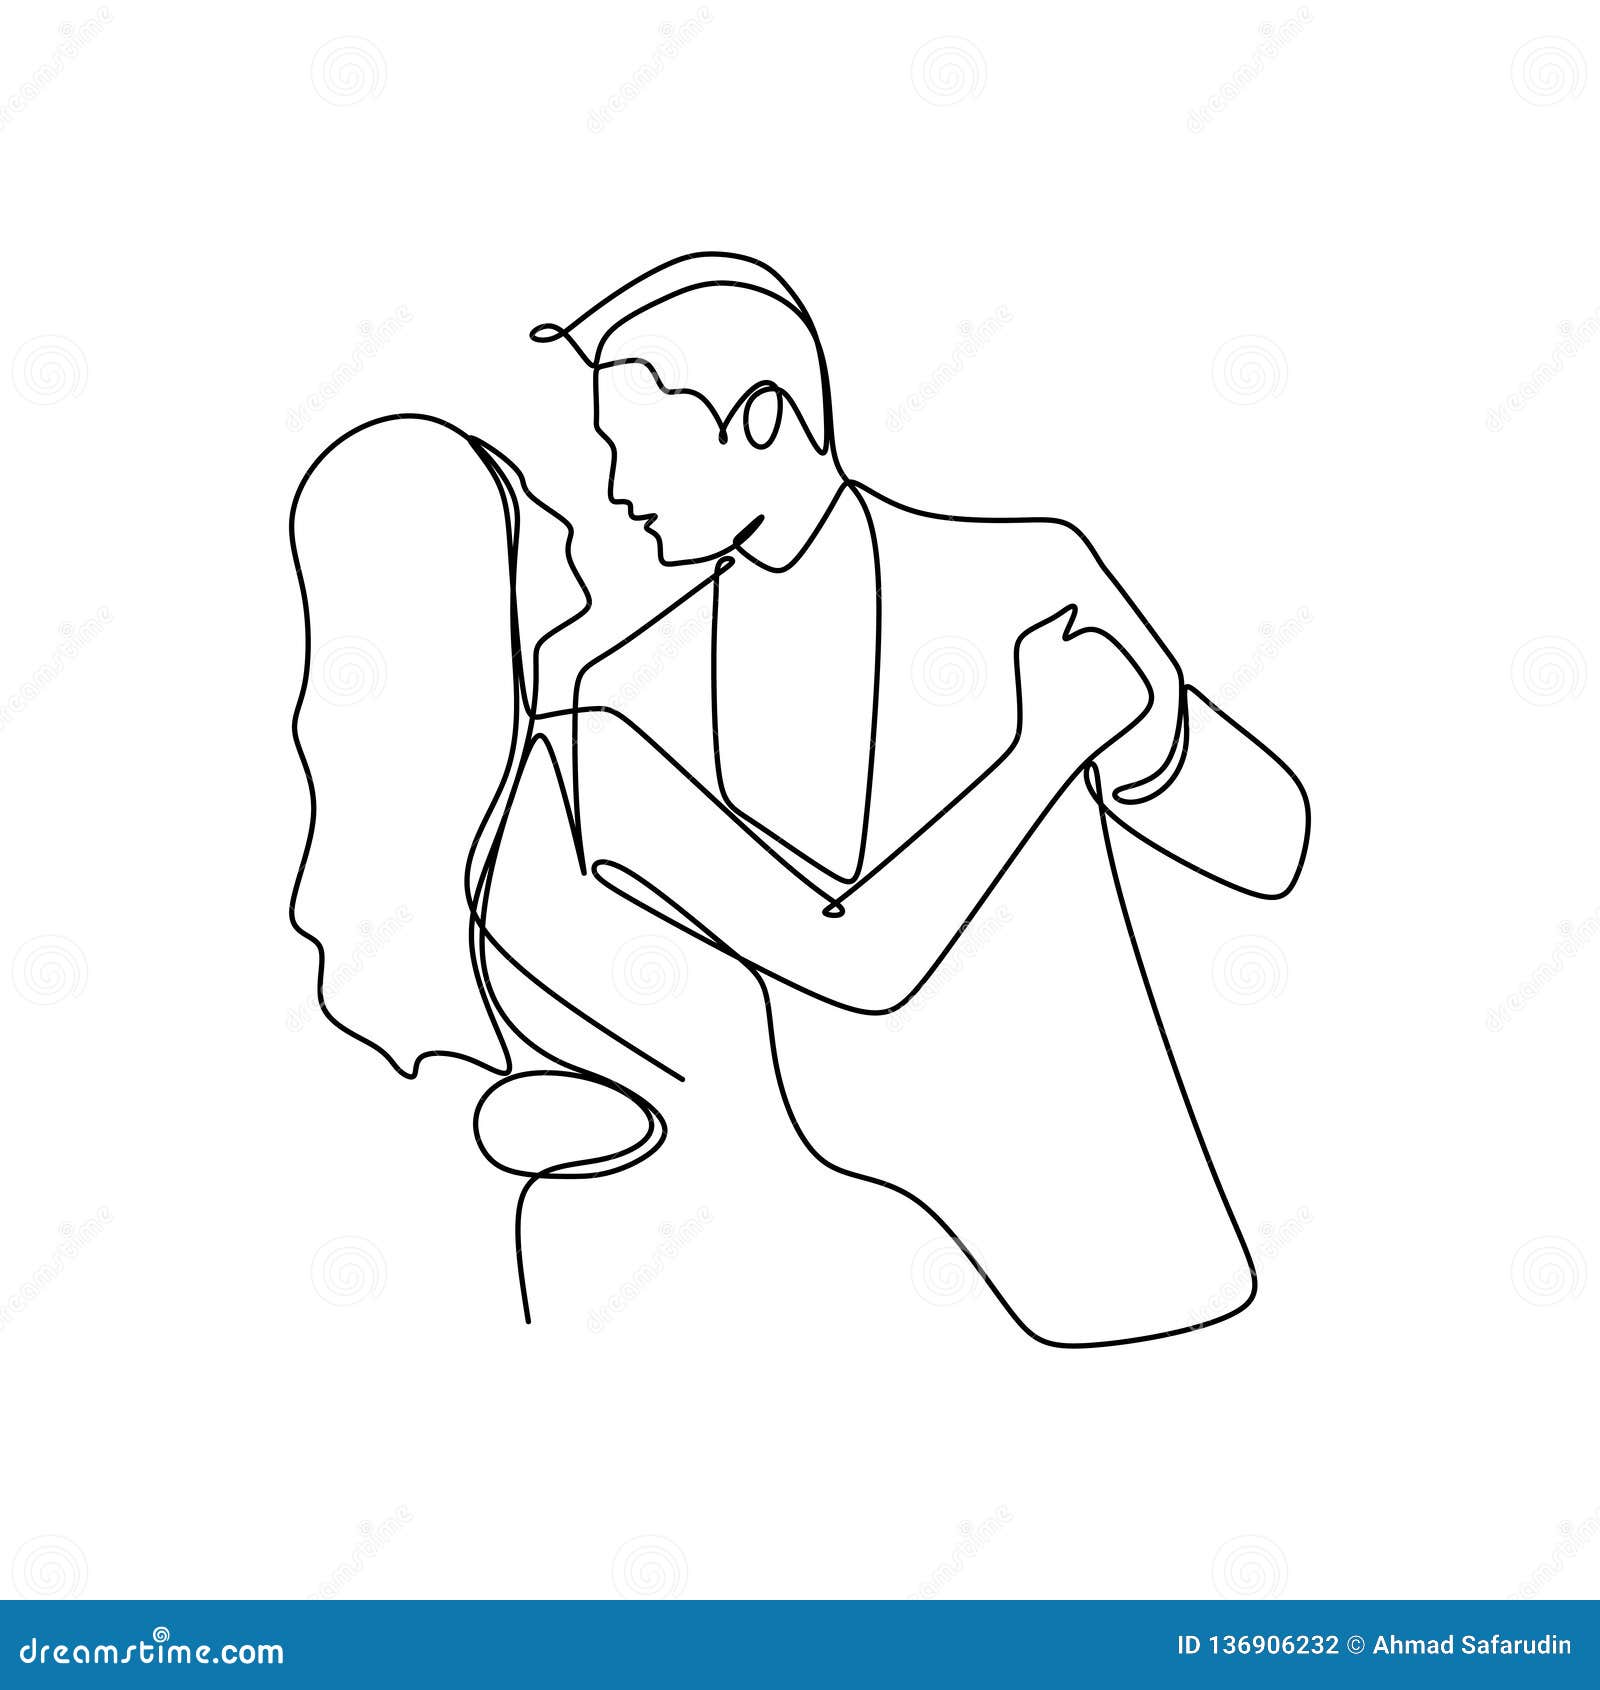 42 Simple Pencil Sketches Of Couples In Love – Artistic Haven-saigonsouth.com.vn